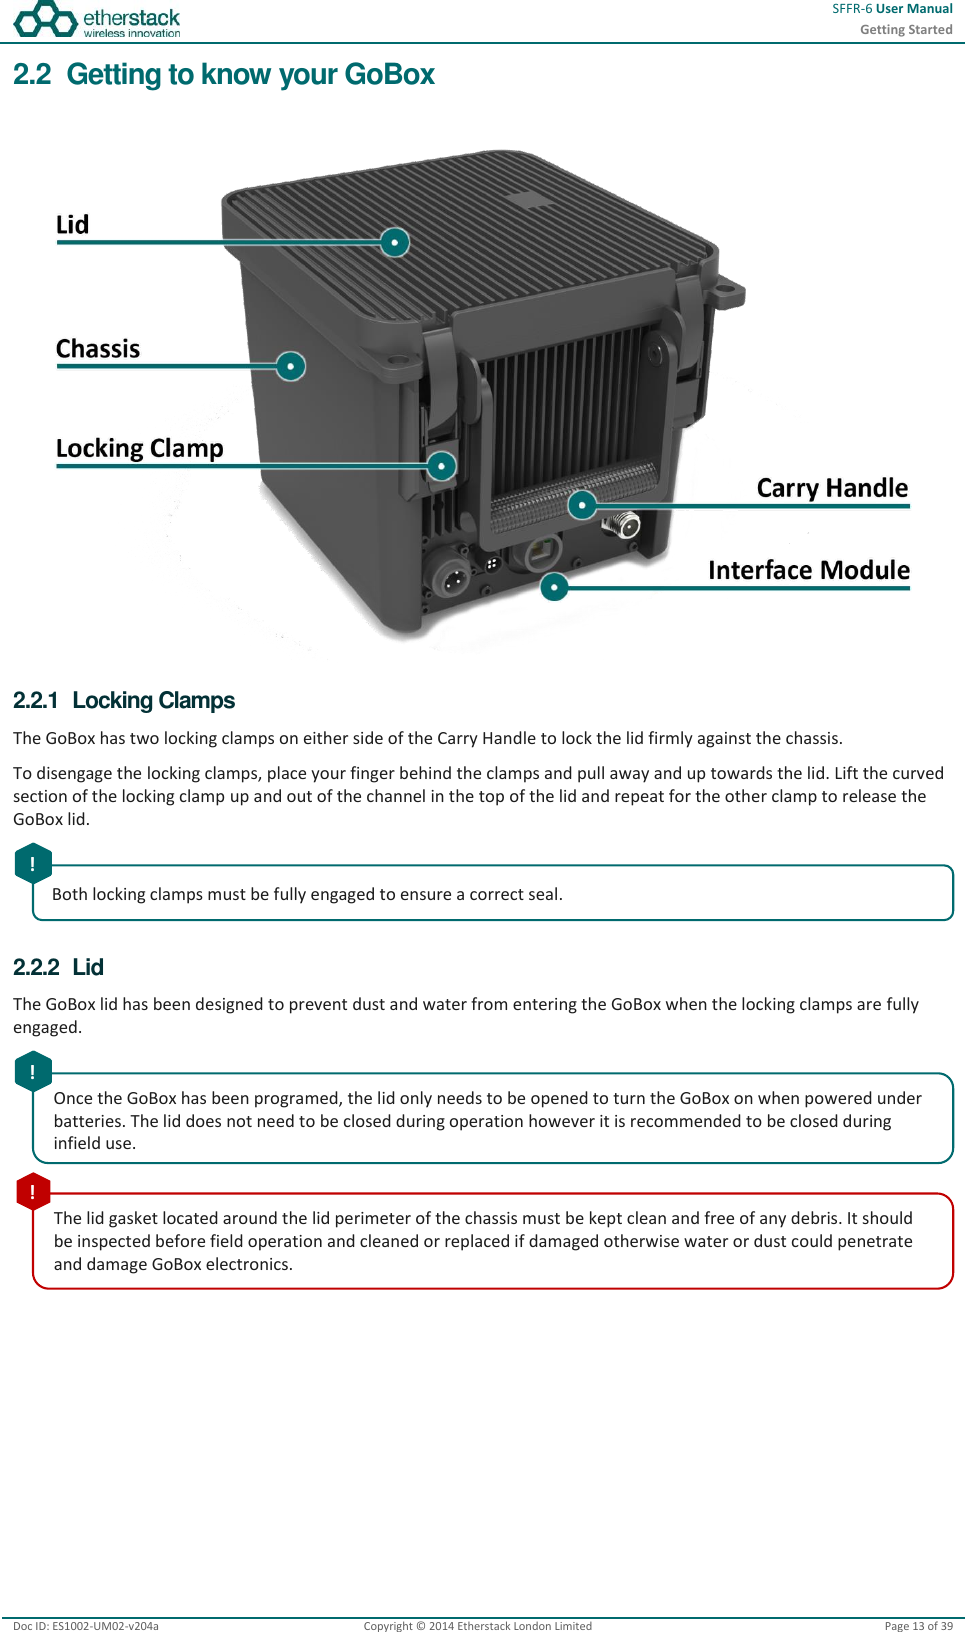  SFFR-6 User Manual Getting Started  Doc ID: ES1002-UM02-v204a Copyright © 2014 Etherstack London Limited Page 13 of 39   2.2  Getting to know your GoBox   2.2.1  Locking Clamps The GoBox has two locking clamps on either side of the Carry Handle to lock the lid firmly against the chassis. To disengage the locking clamps, place your finger behind the clamps and pull away and up towards the lid. Lift the curved section of the locking clamp up and out of the channel in the top of the lid and repeat for the other clamp to release the GoBox lid.  2.2.2  Lid The GoBox lid has been designed to prevent dust and water from entering the GoBox when the locking clamps are fully engaged.     Both locking clamps must be fully engaged to ensure a correct seal.   ! Once the GoBox has been programed, the lid only needs to be opened to turn the GoBox on when powered under batteries. The lid does not need to be closed during operation however it is recommended to be closed during infield use.  ! The lid gasket located around the lid perimeter of the chassis must be kept clean and free of any debris. It should be inspected before field operation and cleaned or replaced if damaged otherwise water or dust could penetrate and damage GoBox electronics.  ! 